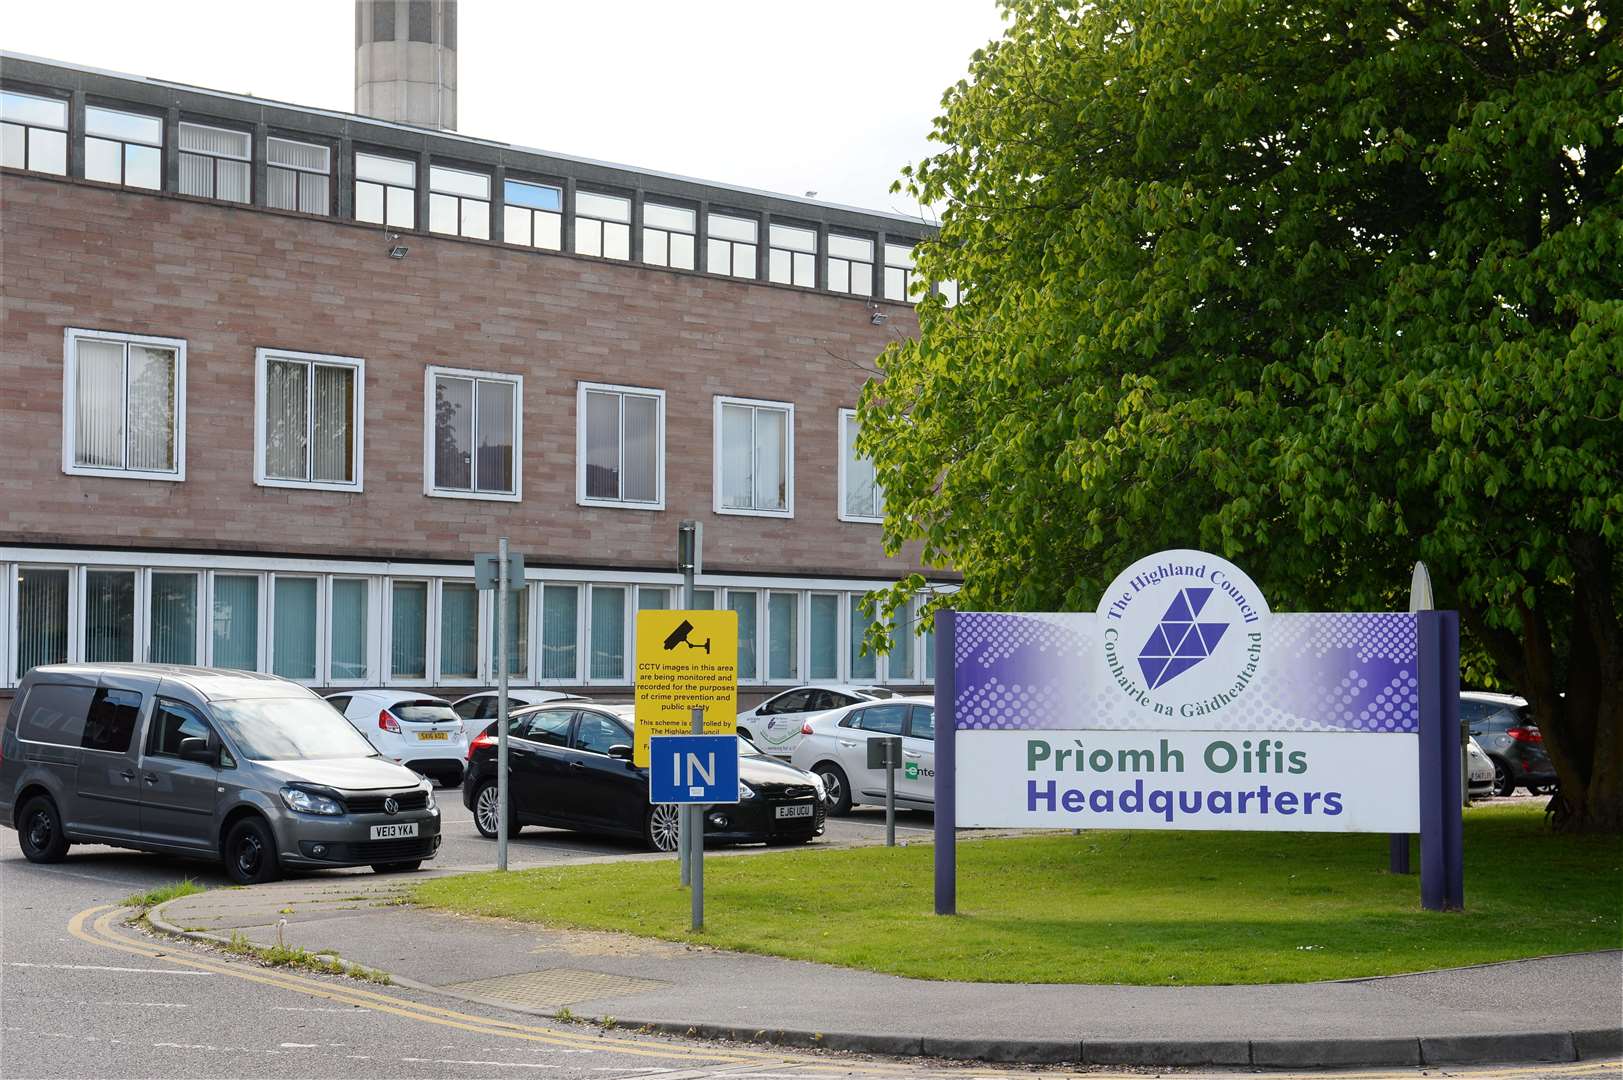 Highland Council has announced capping of school rolls at some Inverness schools.